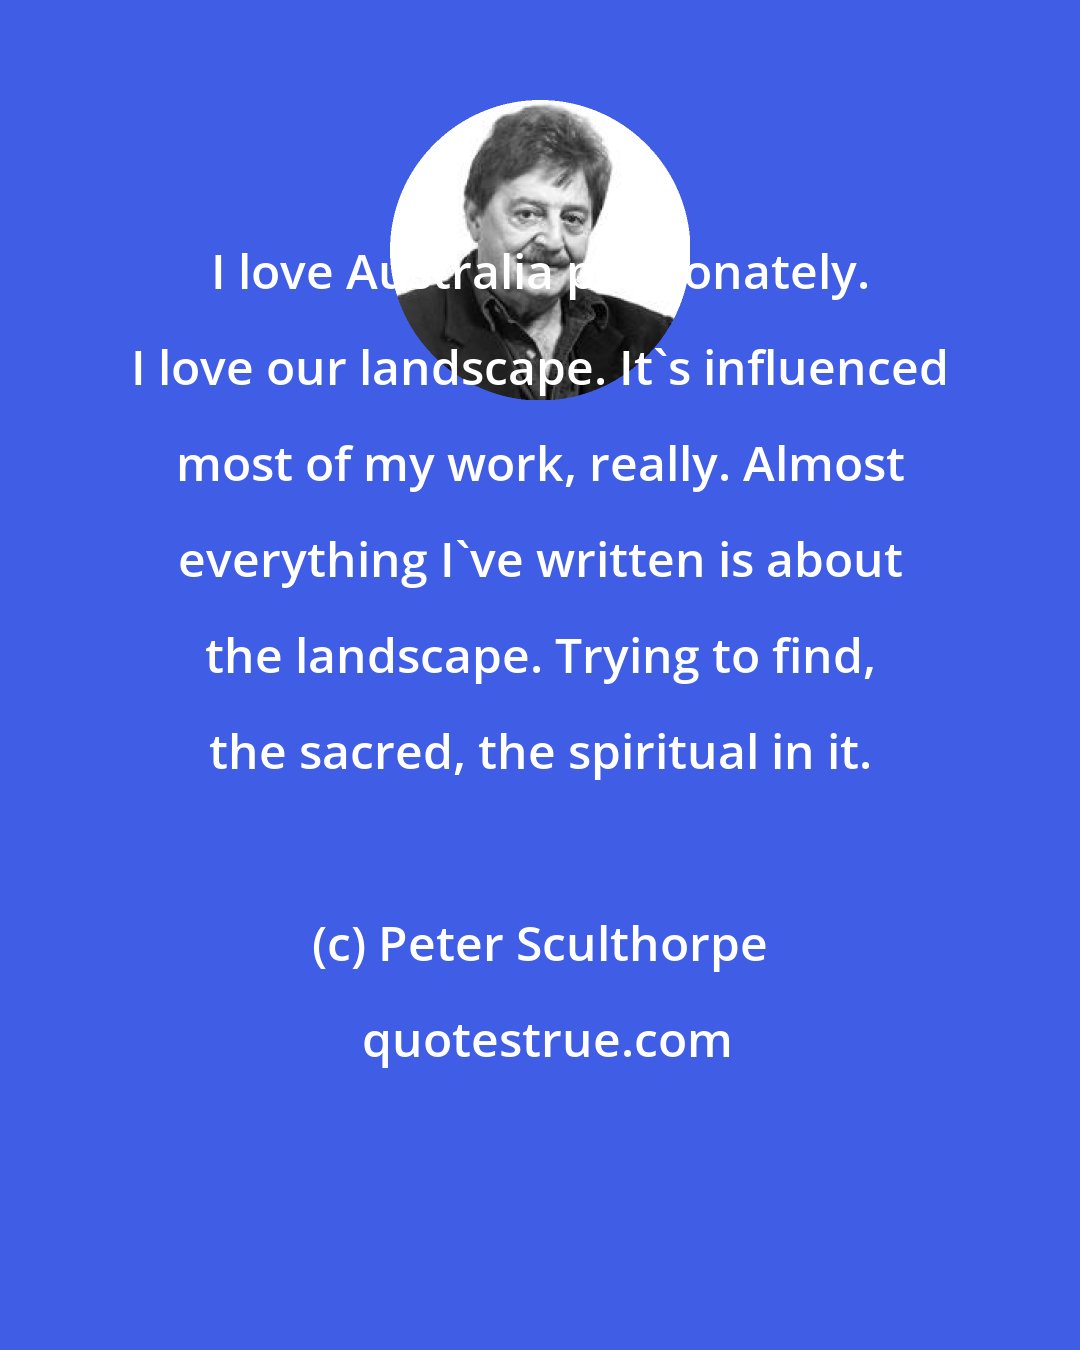 Peter Sculthorpe: I love Australia passionately. I love our landscape. It's influenced most of my work, really. Almost everything I've written is about the landscape. Trying to find, the sacred, the spiritual in it.